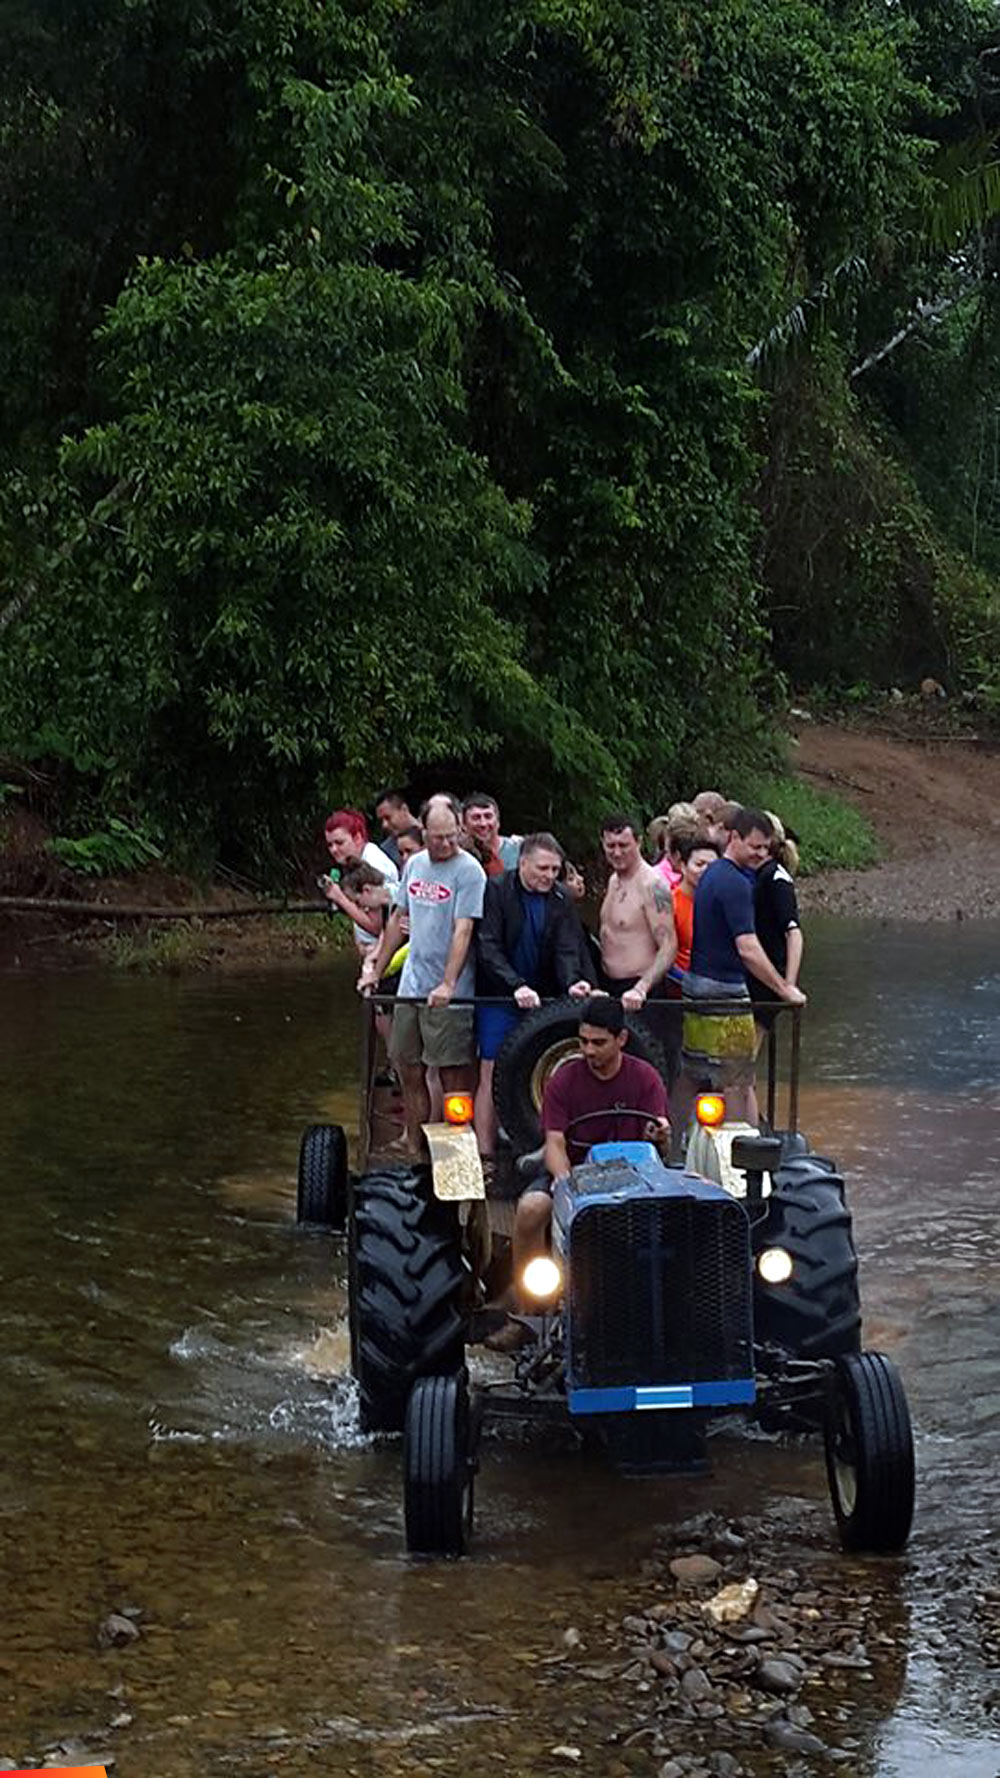 Big cave tubing group crossing the river in a tractor